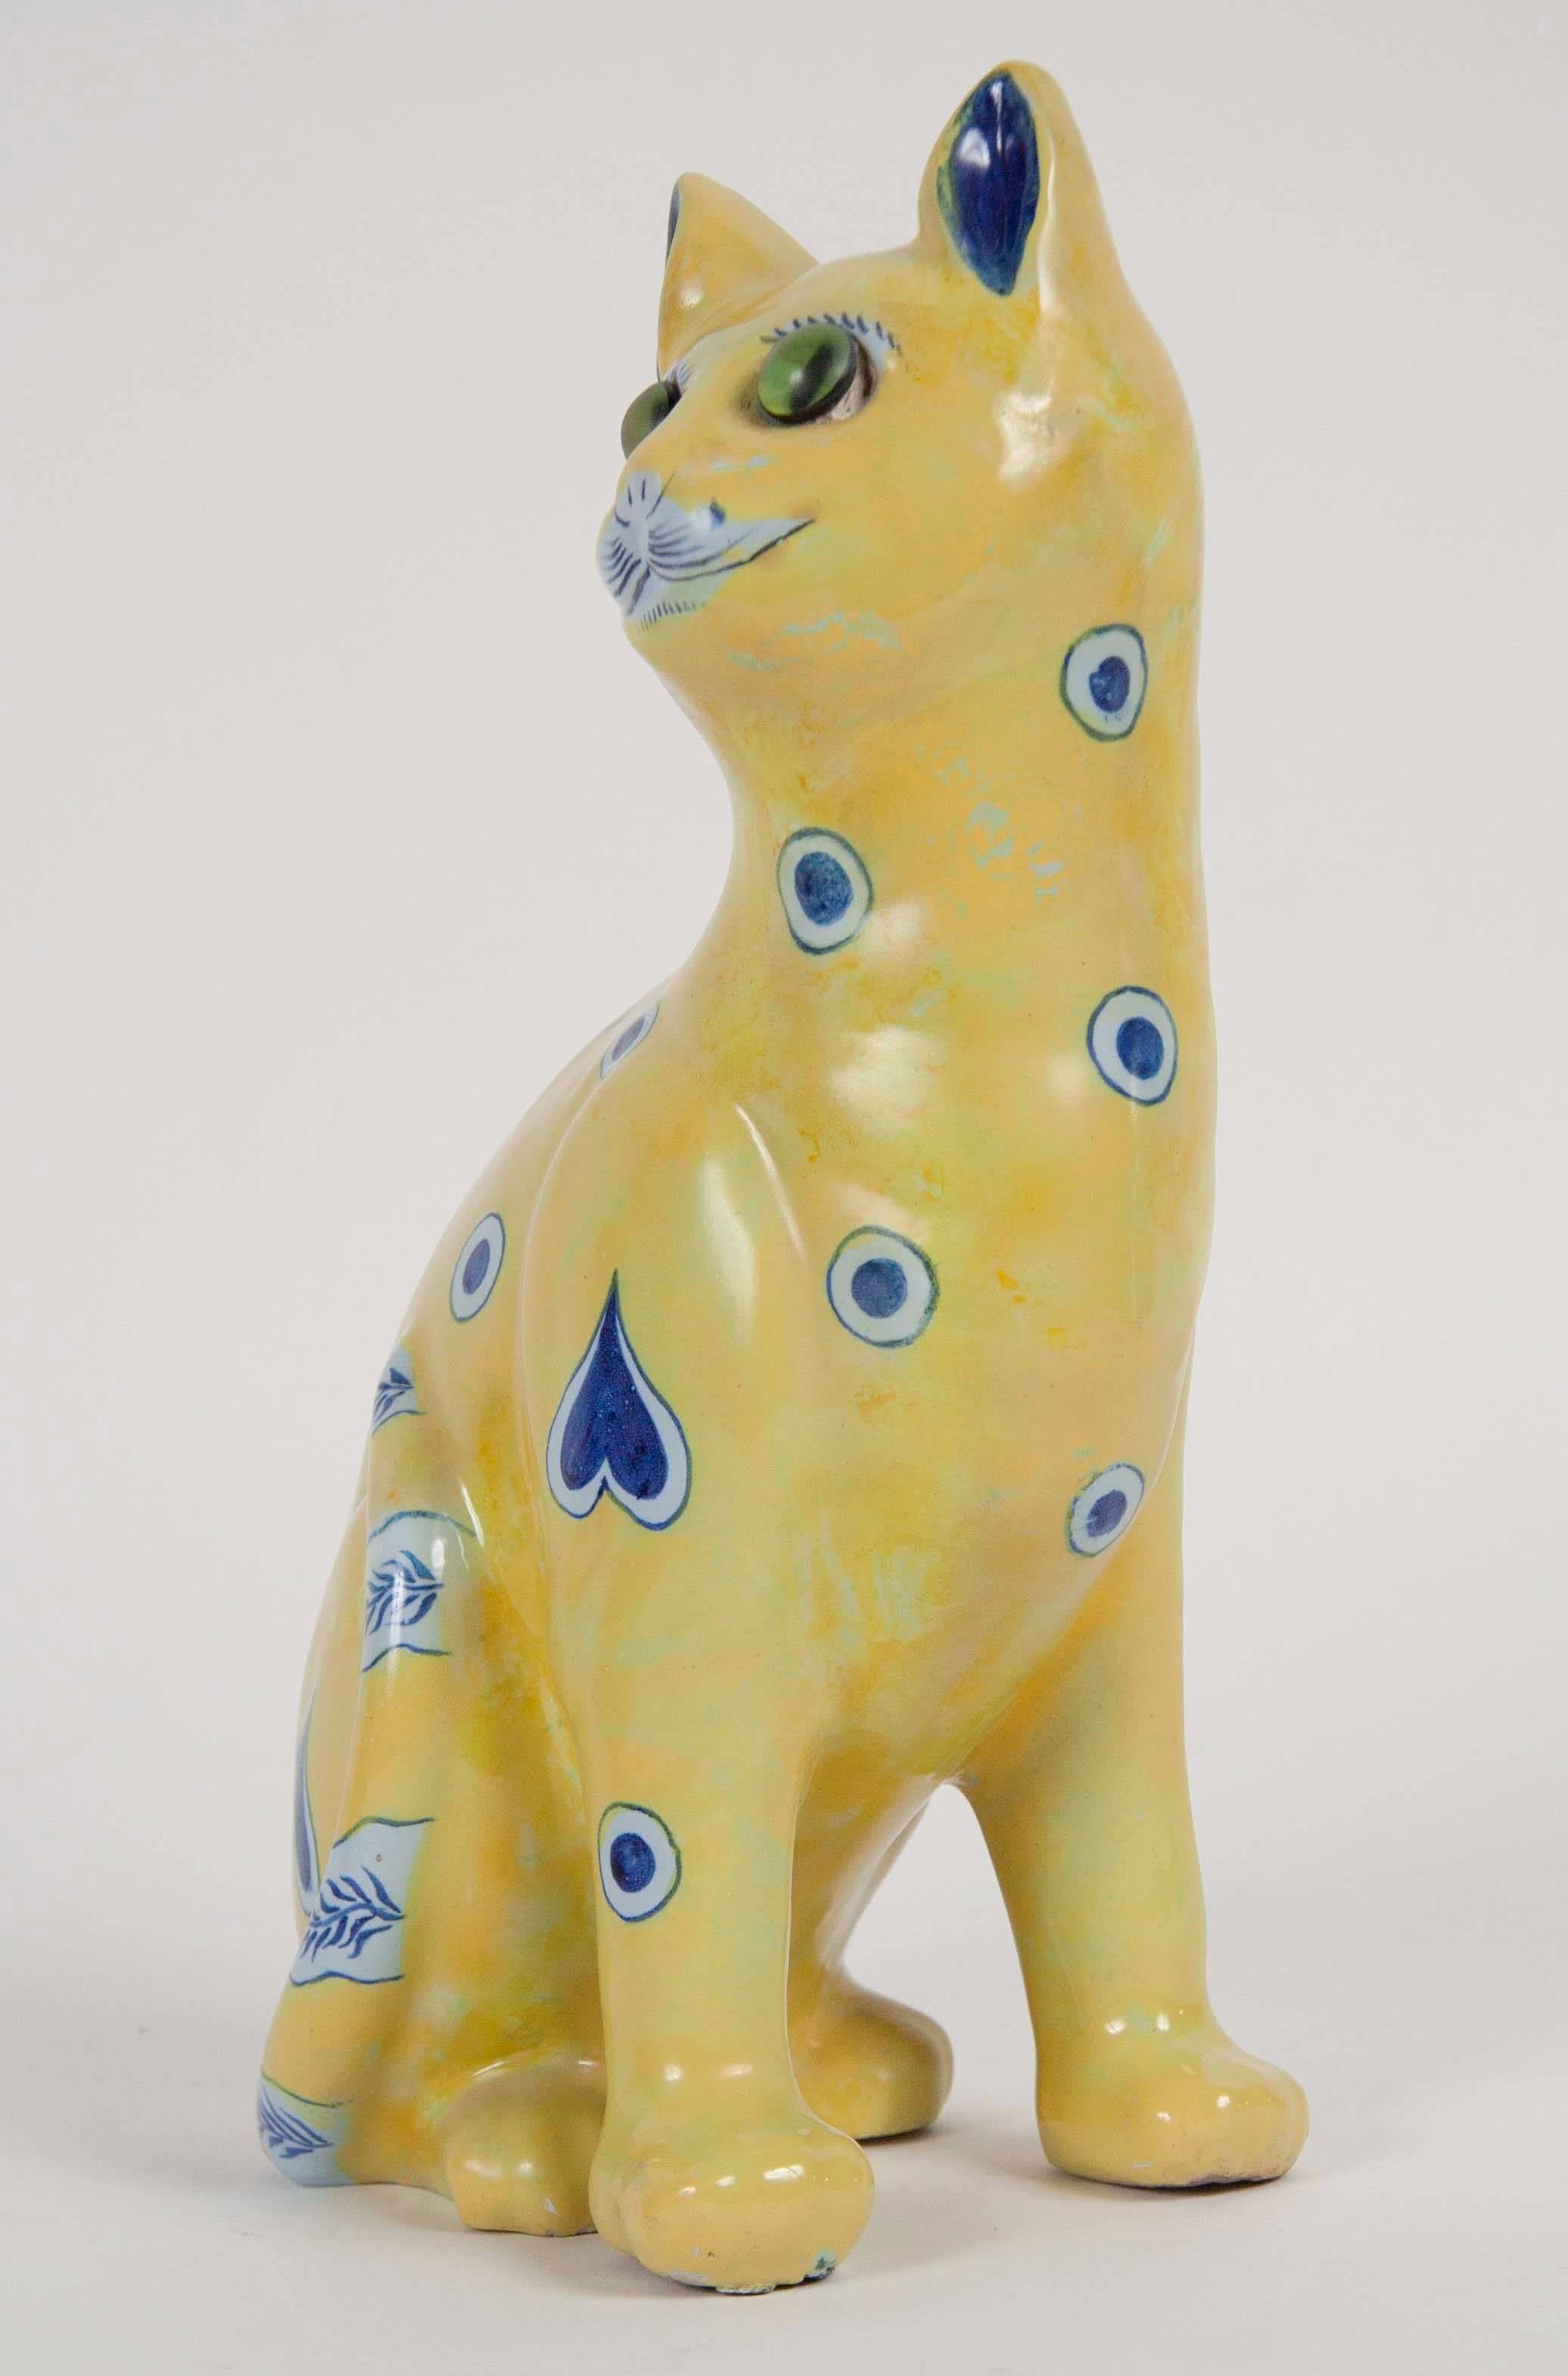 A yellow painted ceramic cat by Emile Galle. Signed on bottom.